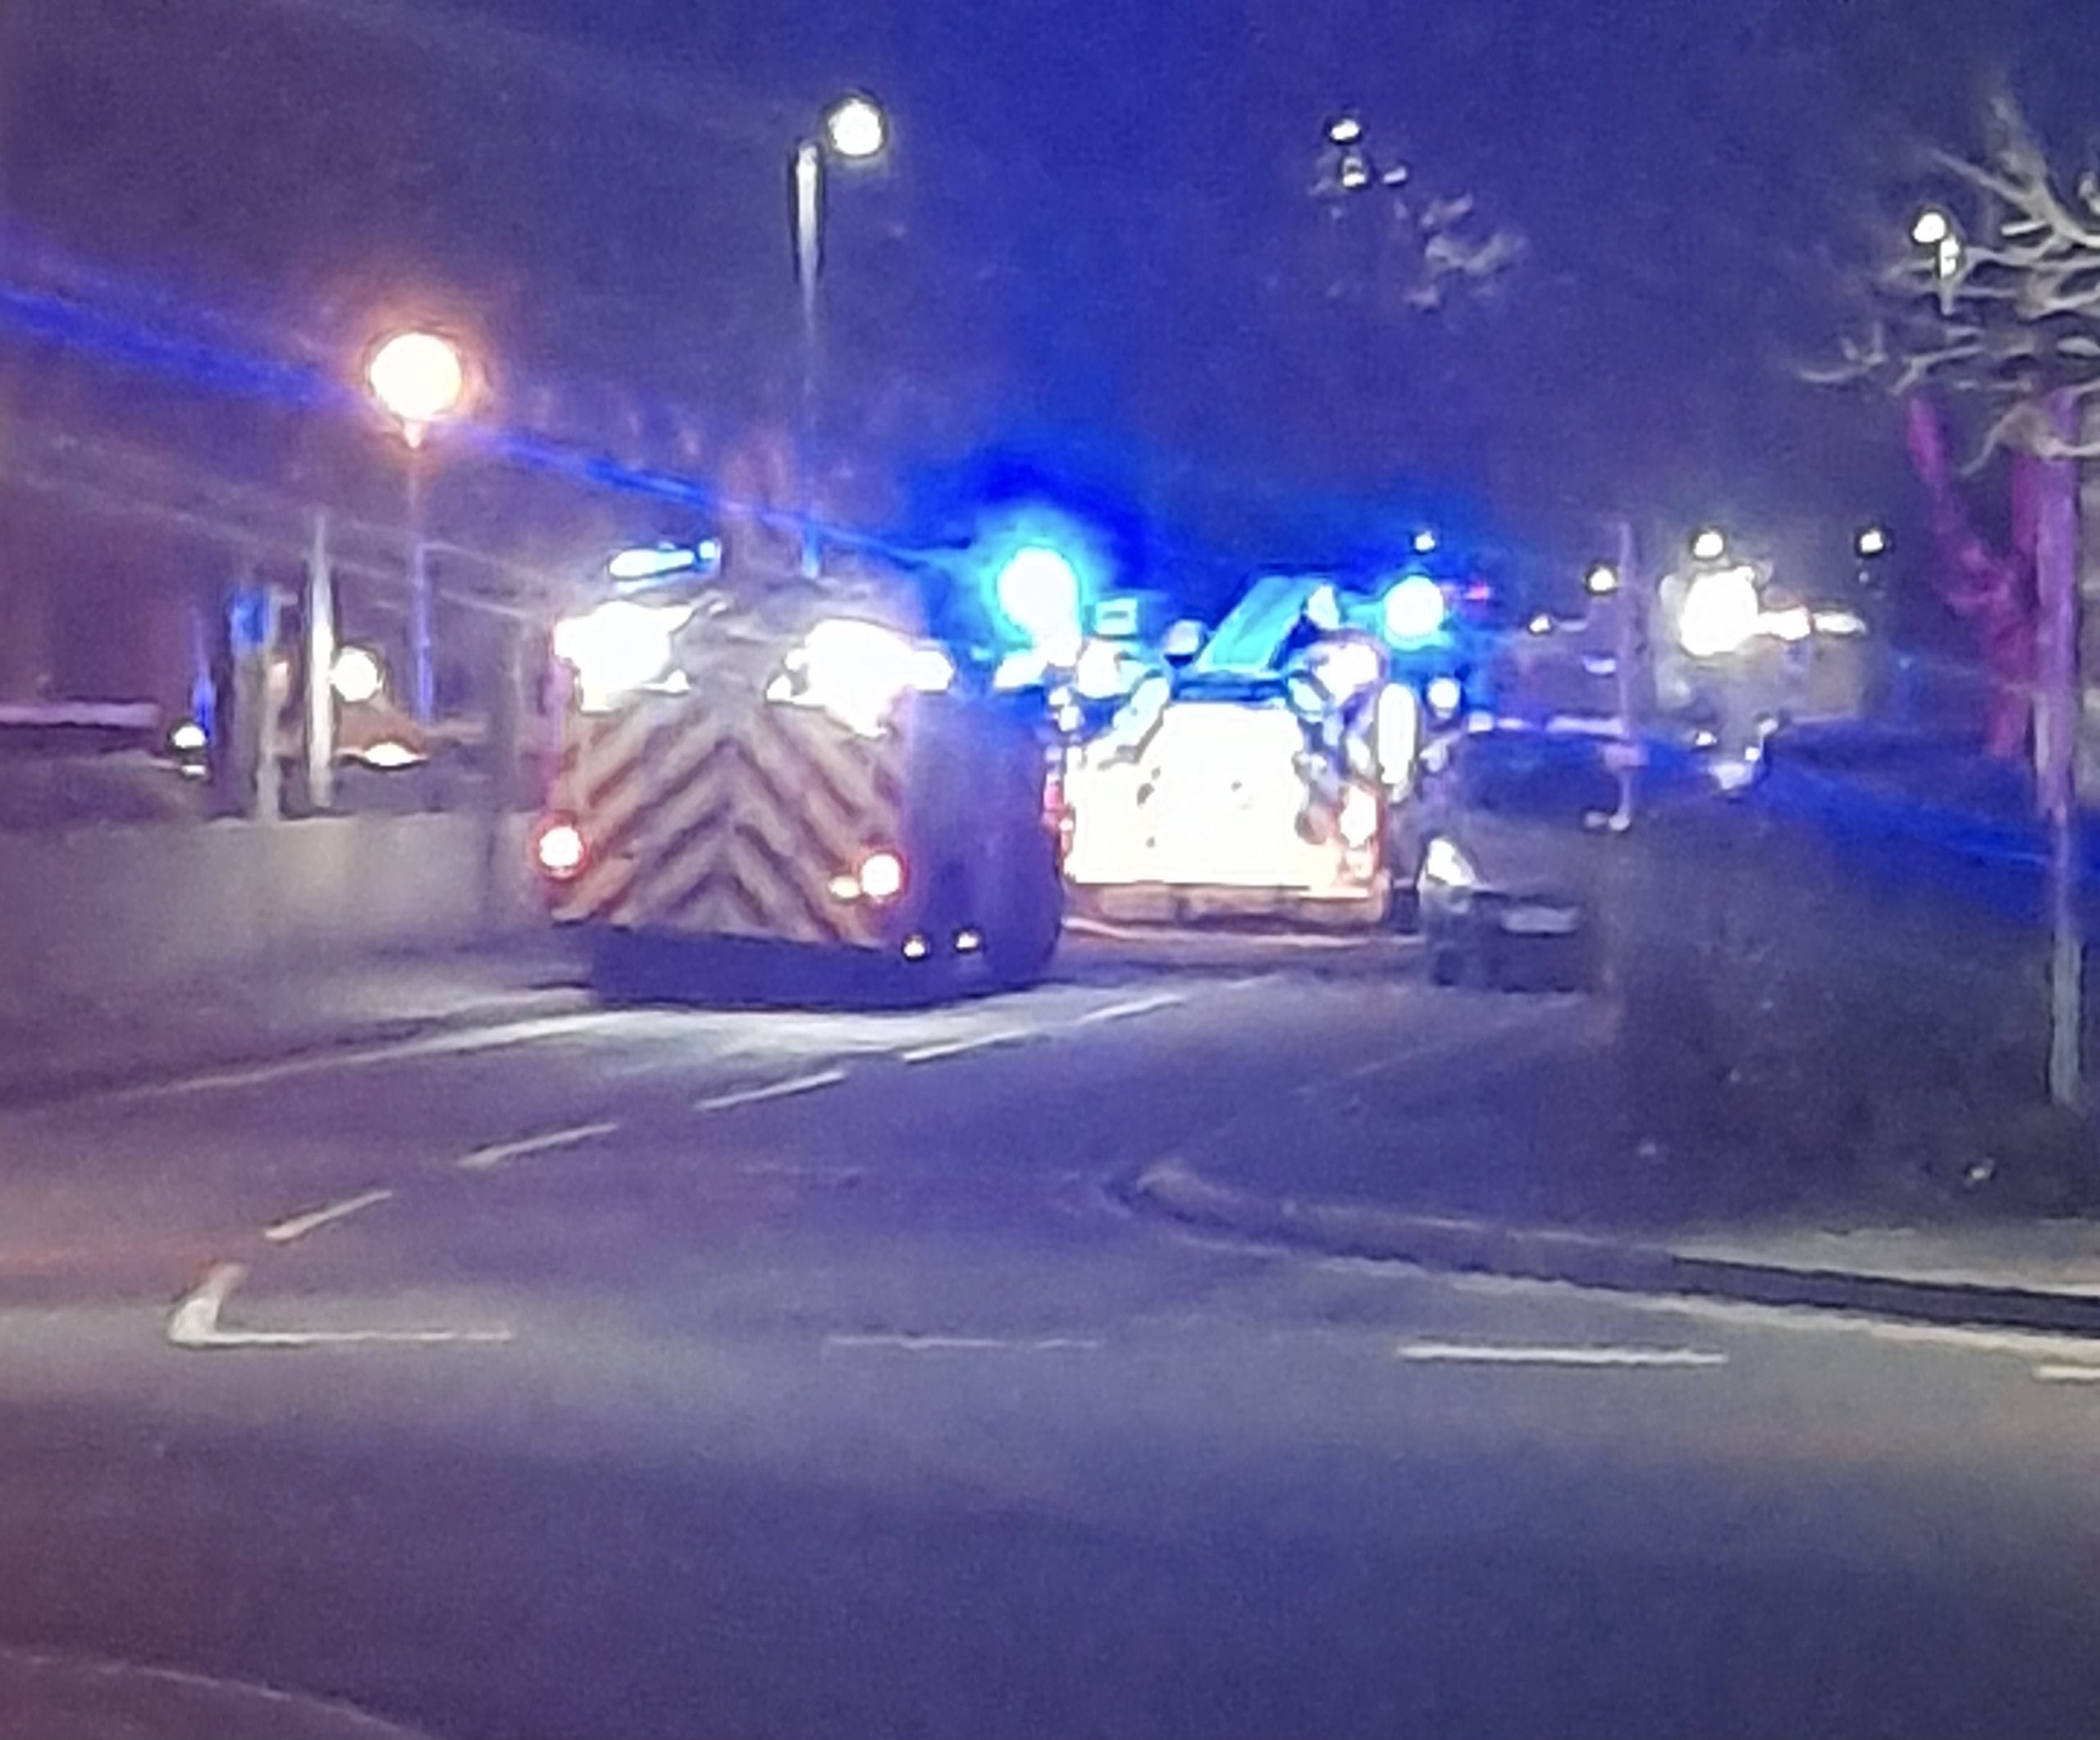 UPDATE | Stonebow Road now open after earlier incident